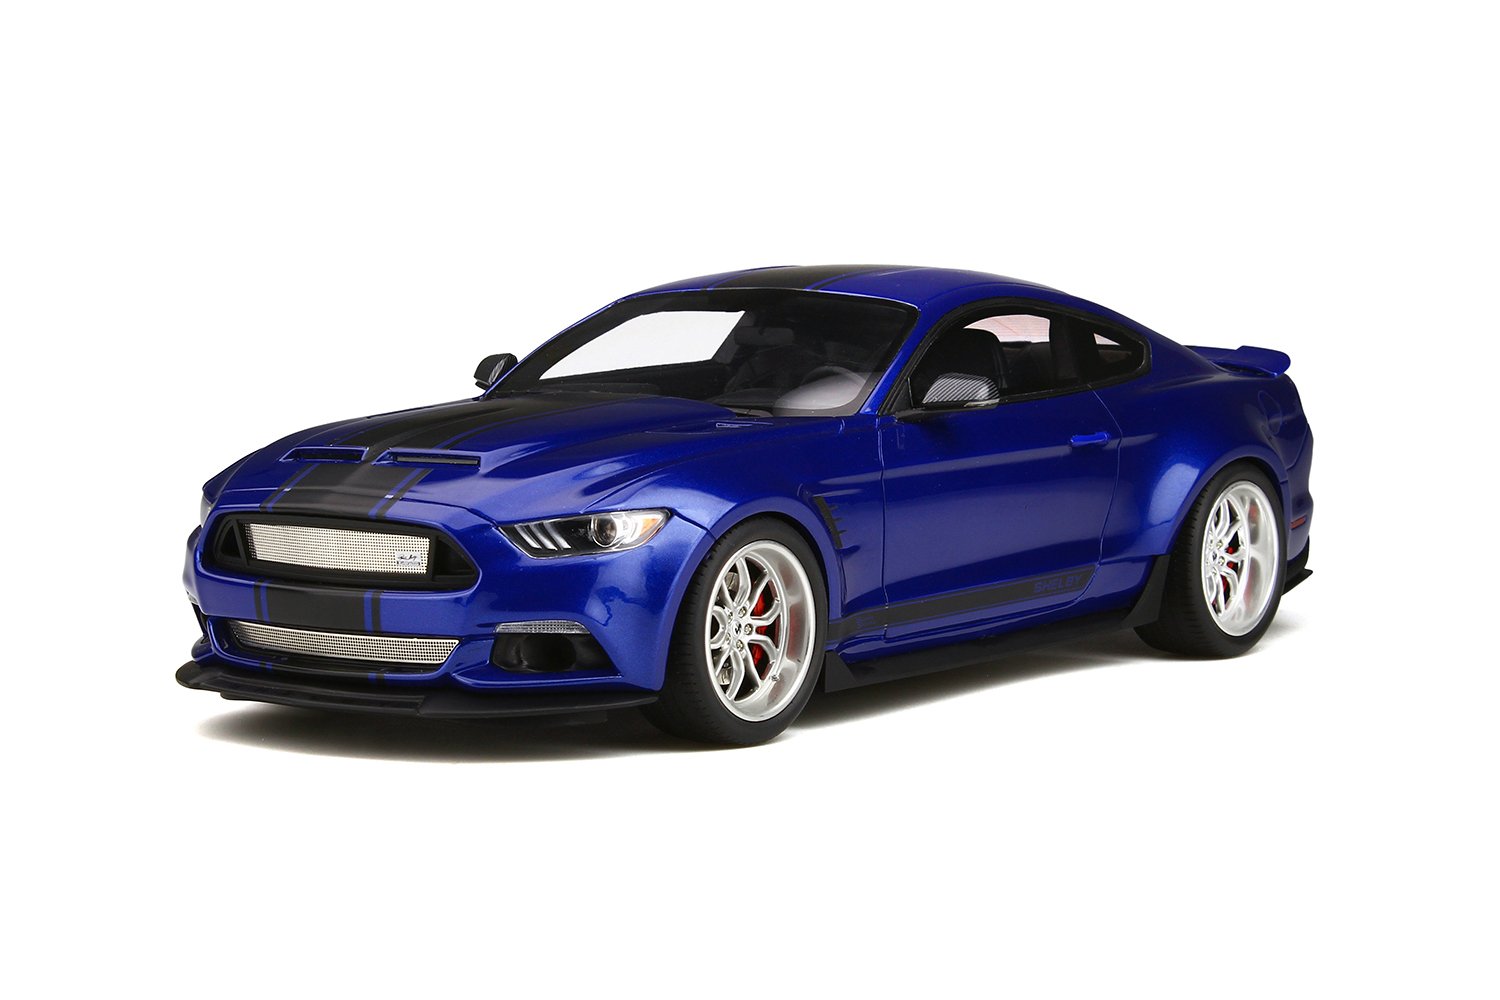 Ford Mustang Shelby Gt350 "widebody" Deep Impact Blue With Black Stripes Limited Edition To 999 Pieces Worldwide 1/18 Model Car By Gt Spirit